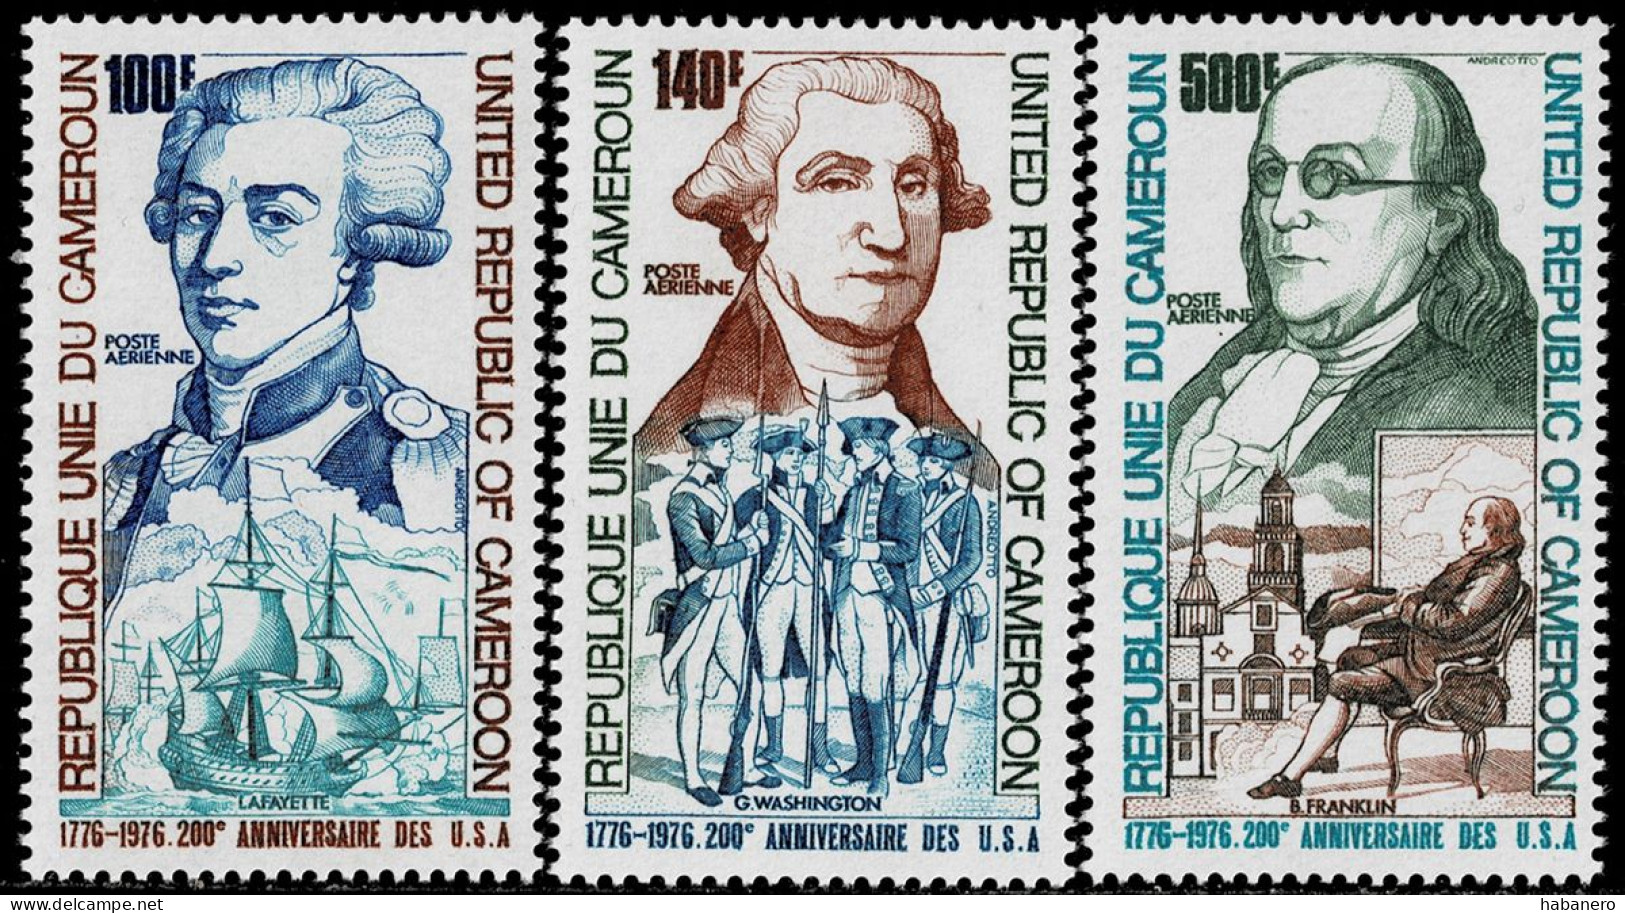 CAMEROON 1975 Mi 809-811 BICENTENARY OF AMERICAN REVOLUTION MINT STAMPS ** - Independecia USA